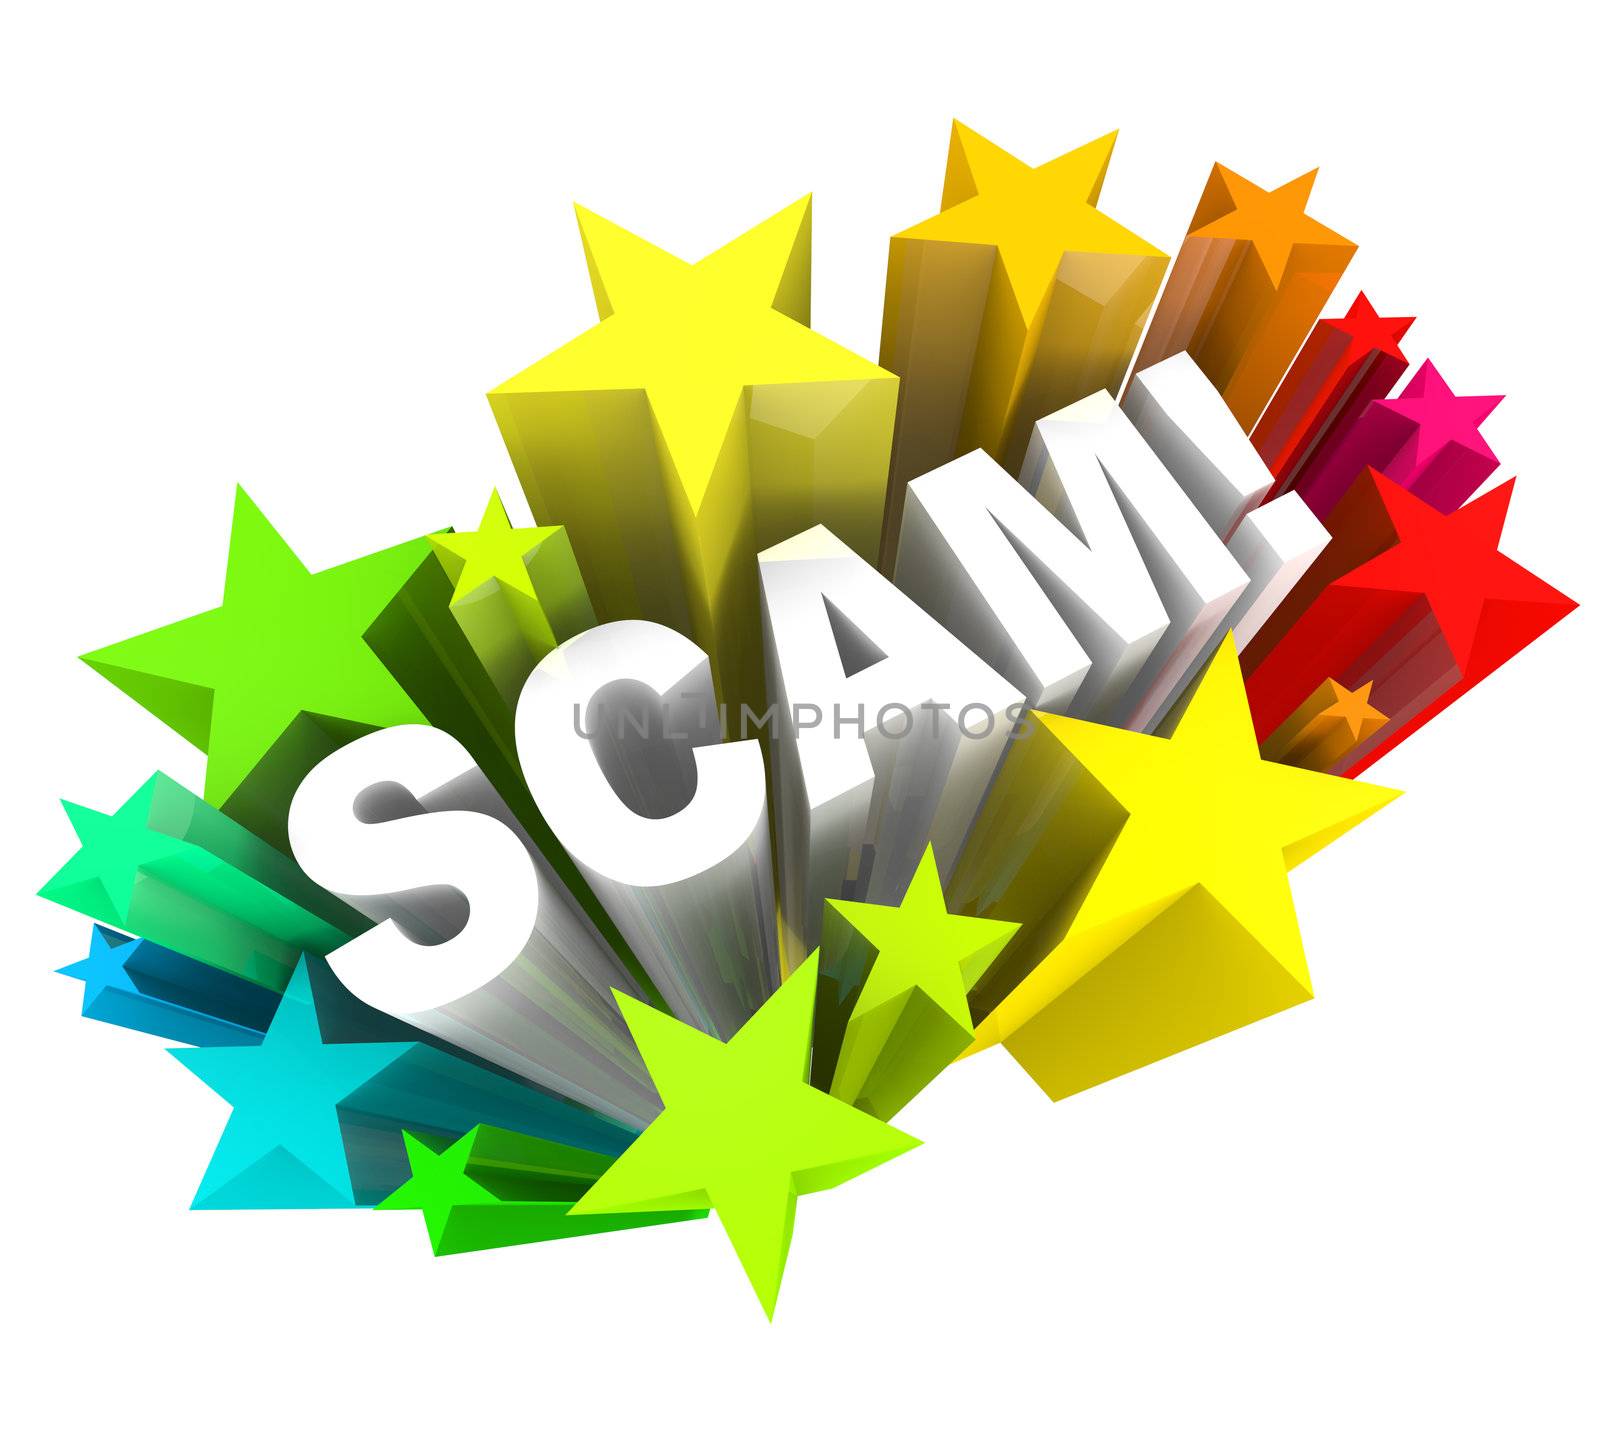 Scam 3D Word Swindle Con Game to Cheat You Out of Money by iQoncept